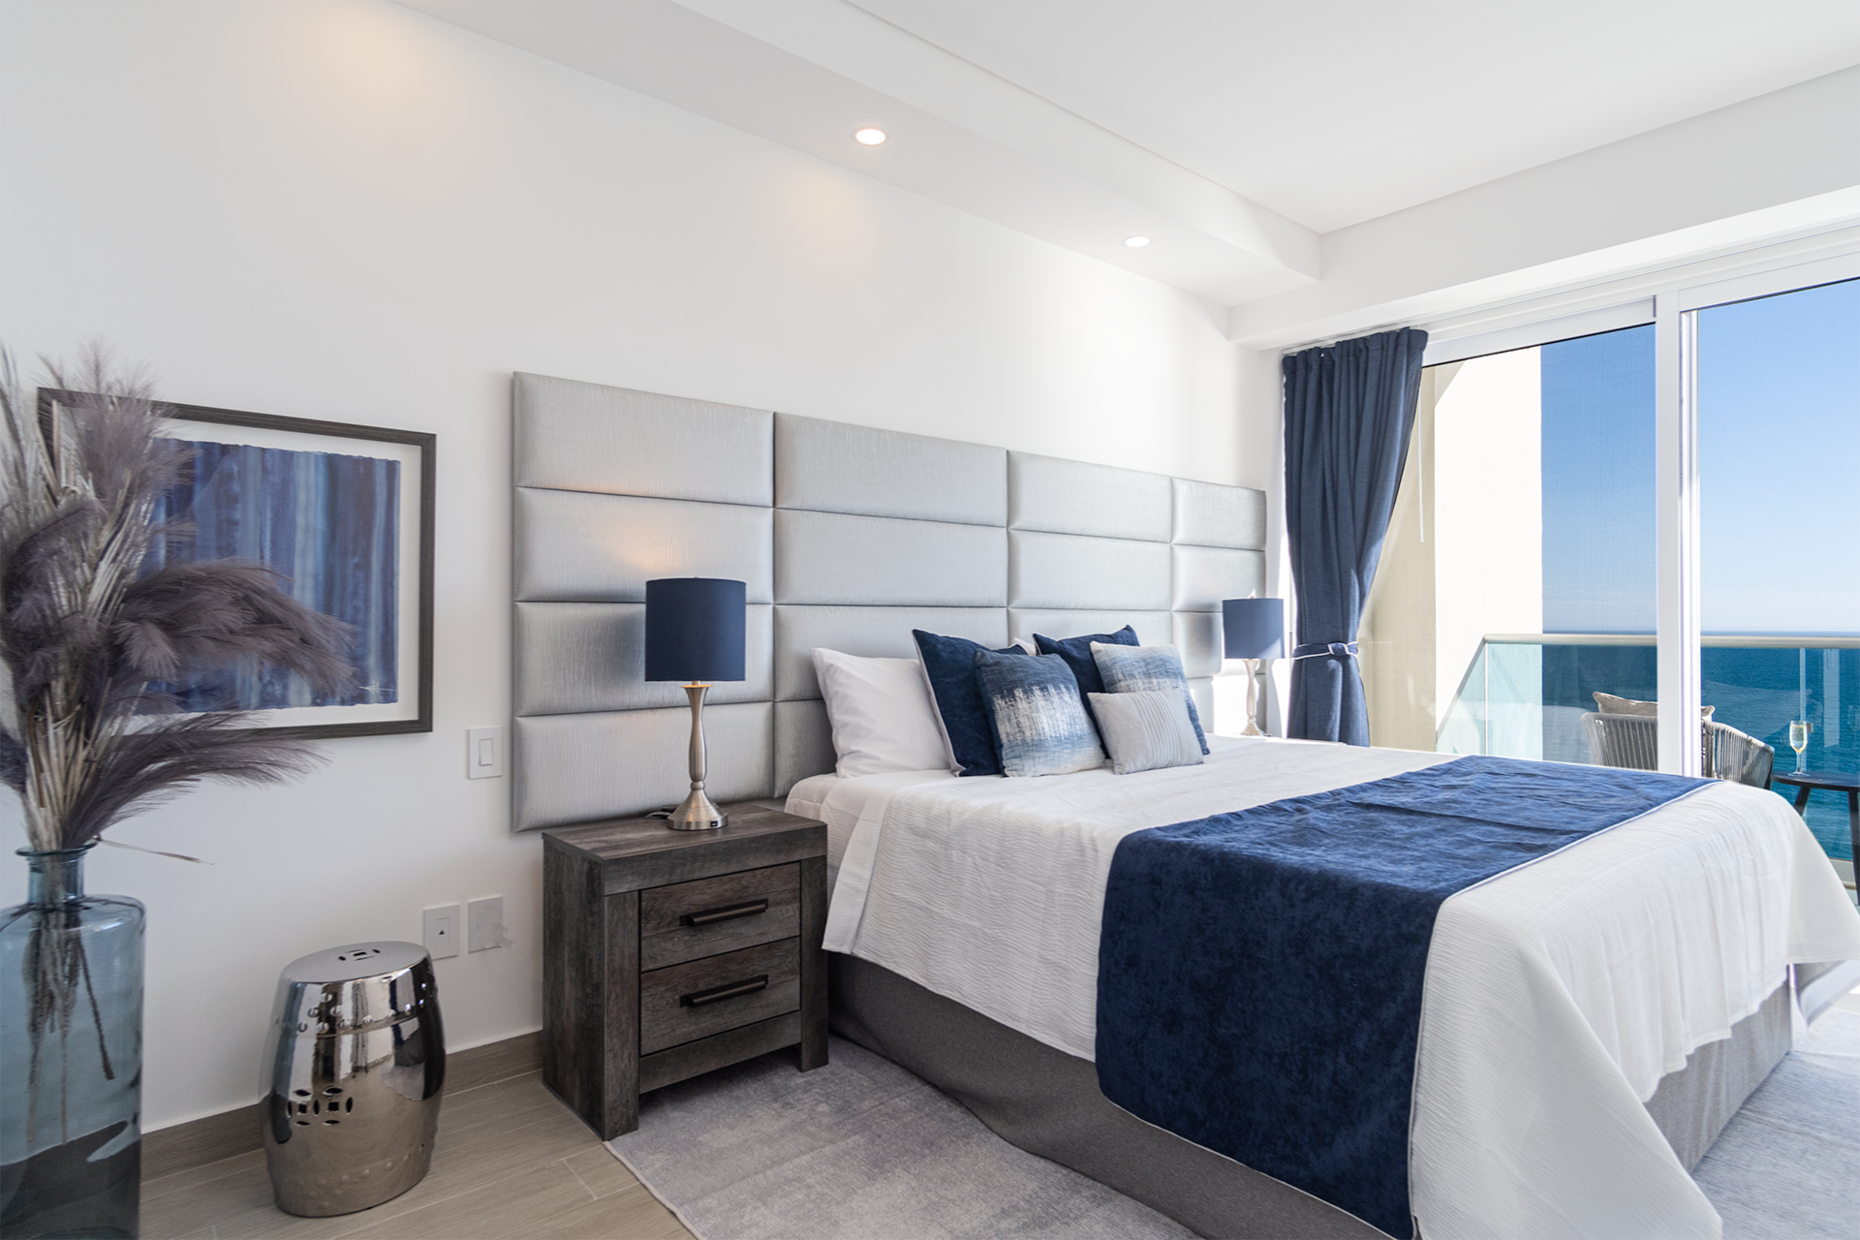 Two of the bedrooms are suites with their own patio access and King beds.